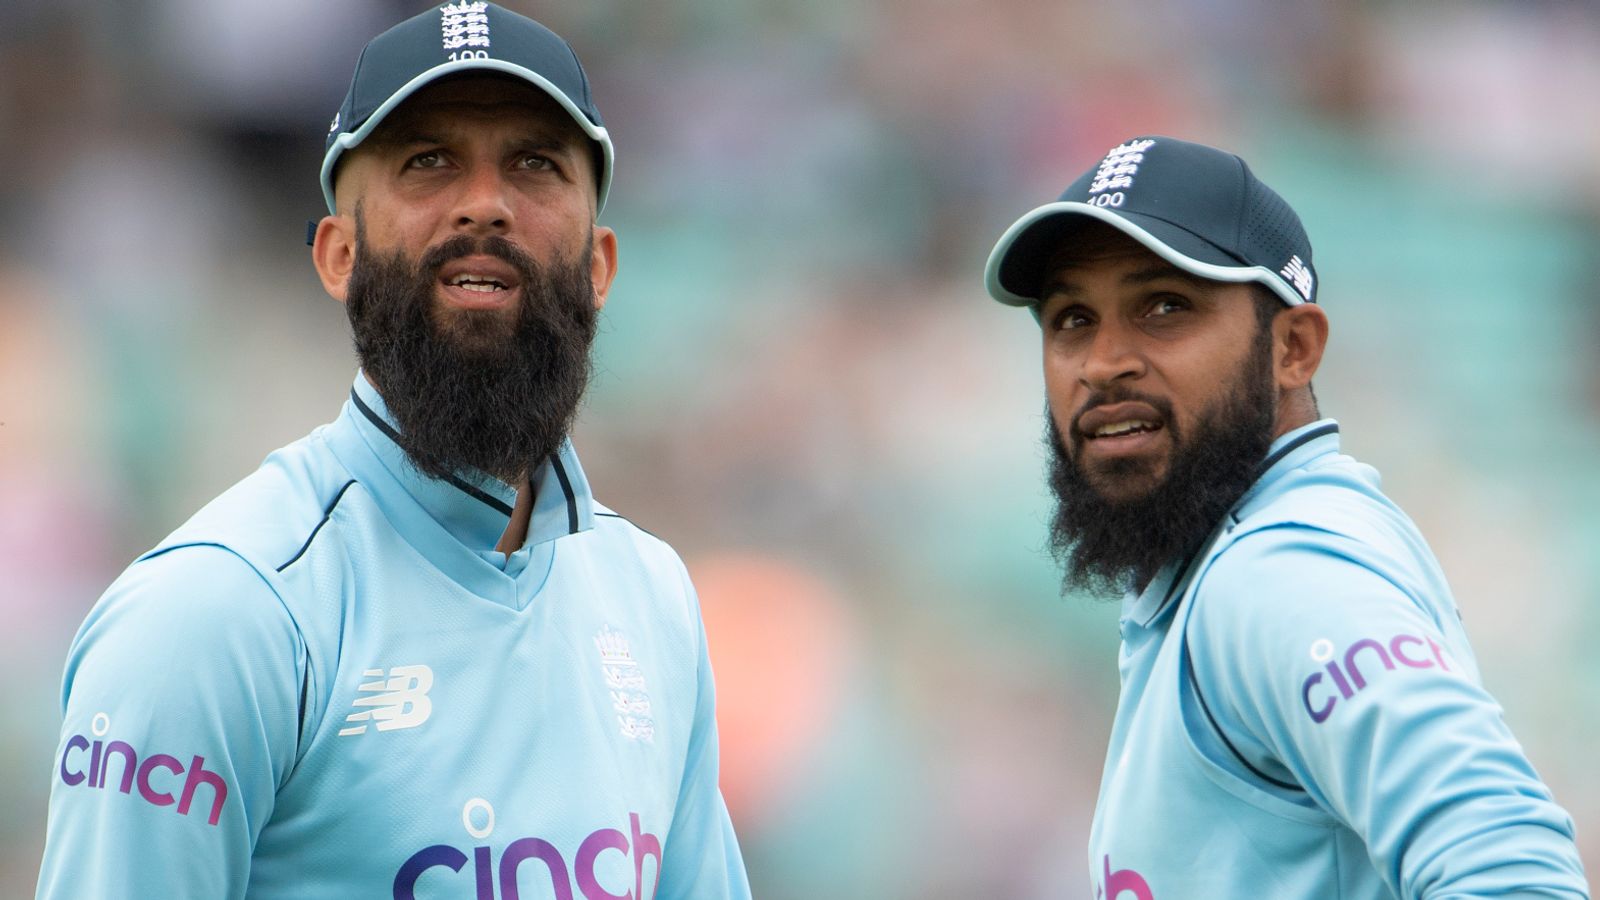 Jos Buttler, Moeen Ali and Adil Rashid could be part of England Test revamp – Brendon McCullum